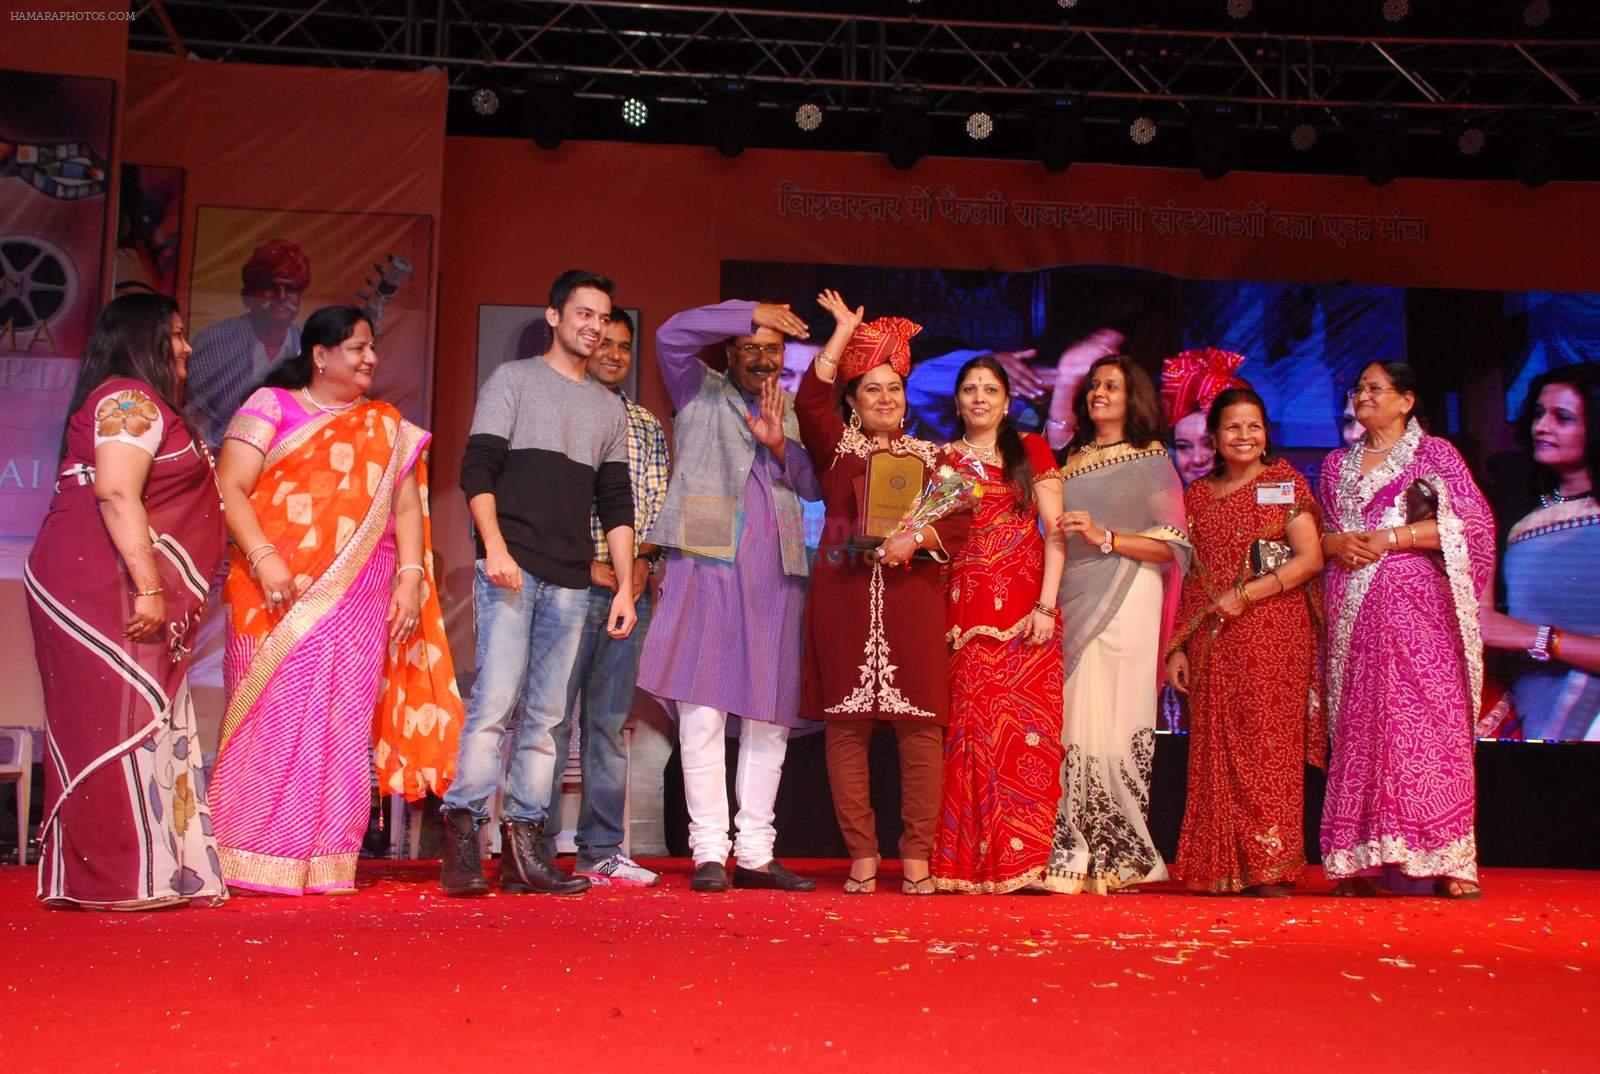 at Rajasthan movie awards meet in Goregaon on 30th March 2015